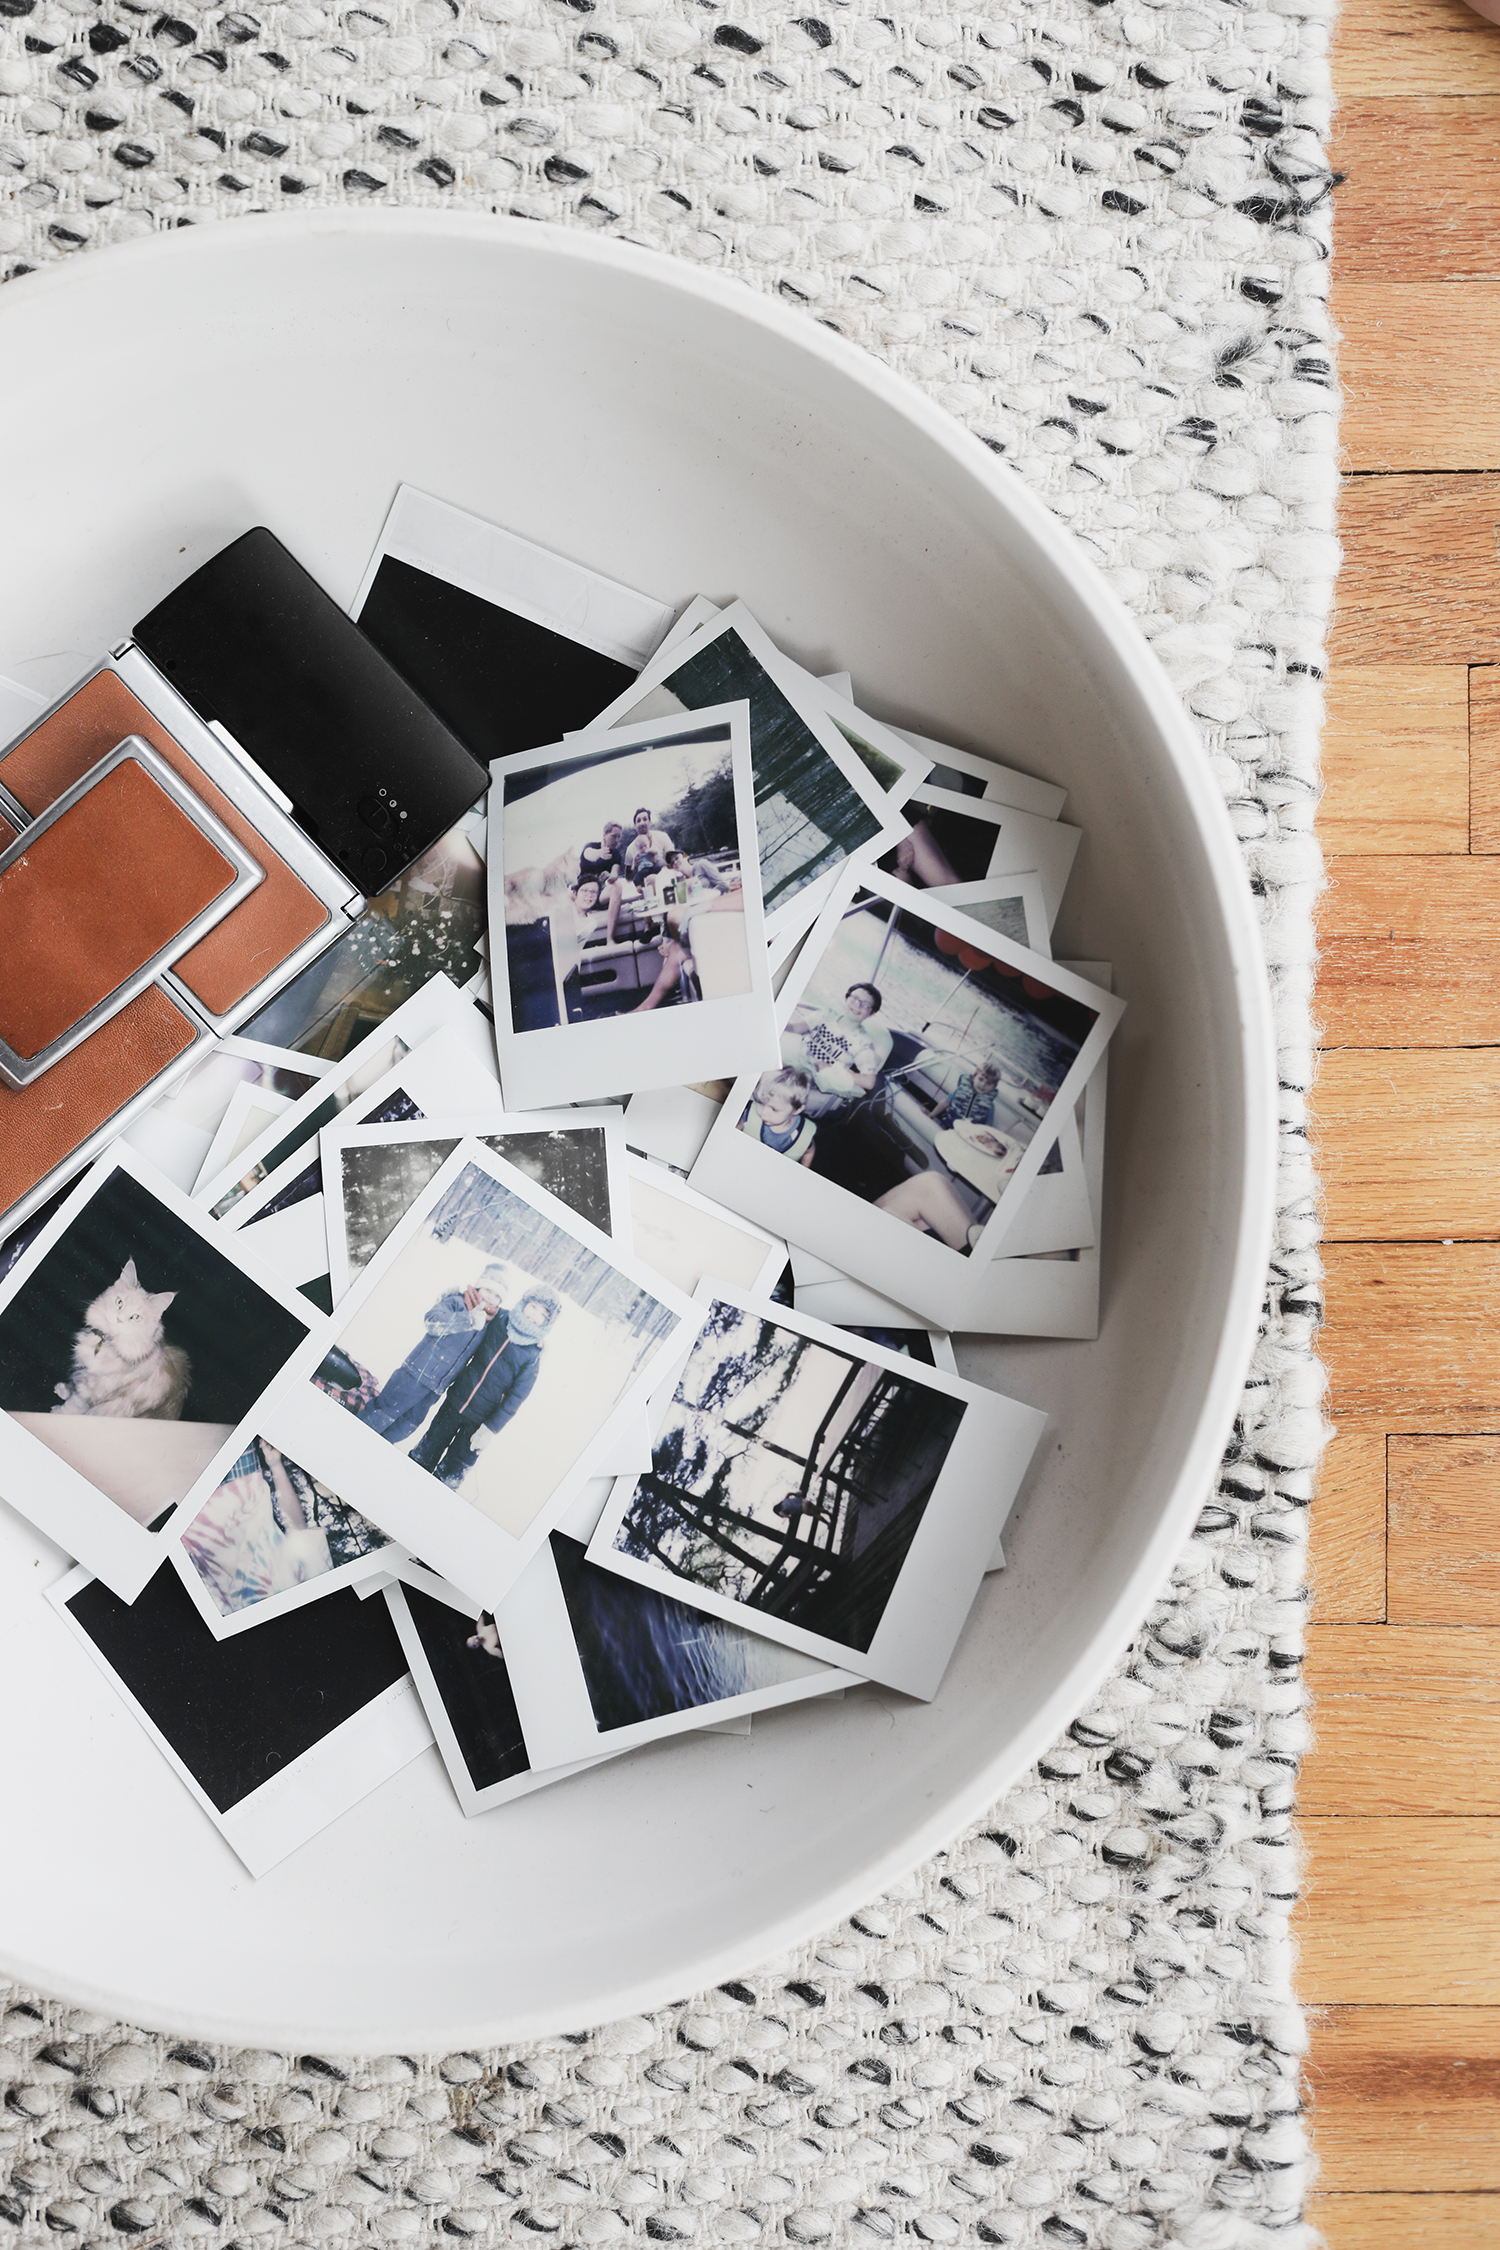 Polaroid Guest Book Wedding Must Haves